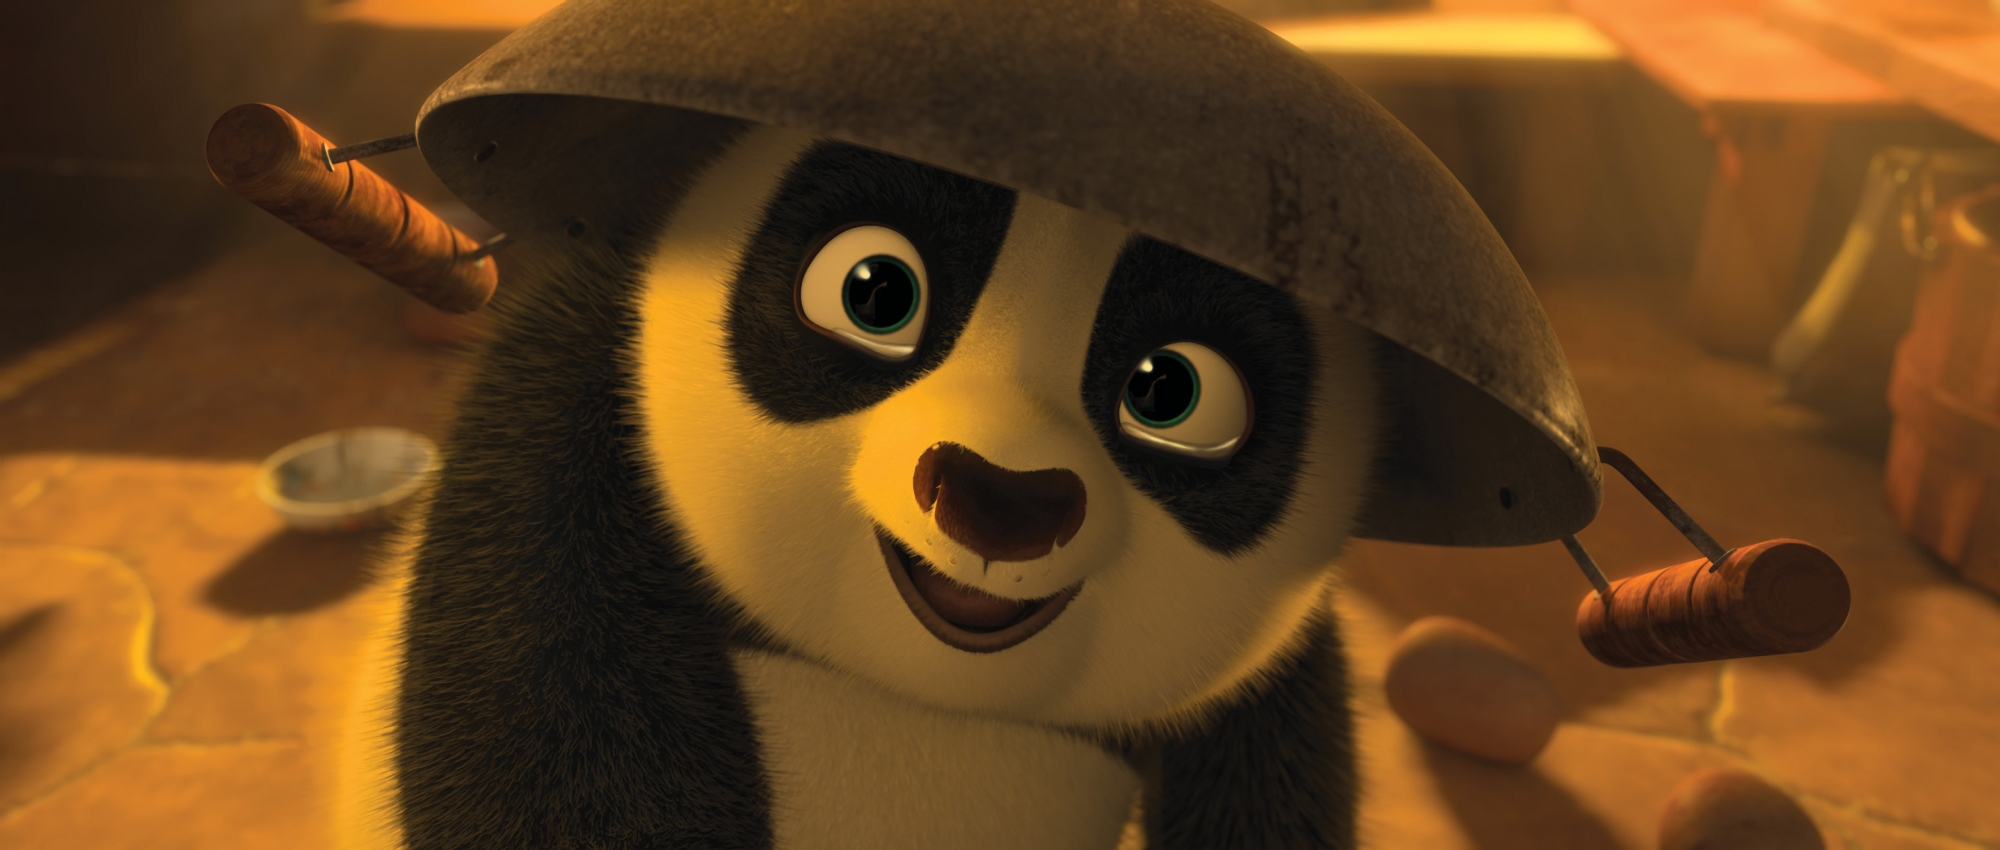 Send A KUNG FU PANDA 2 Mother's Day E-Card & Check Out This New Image